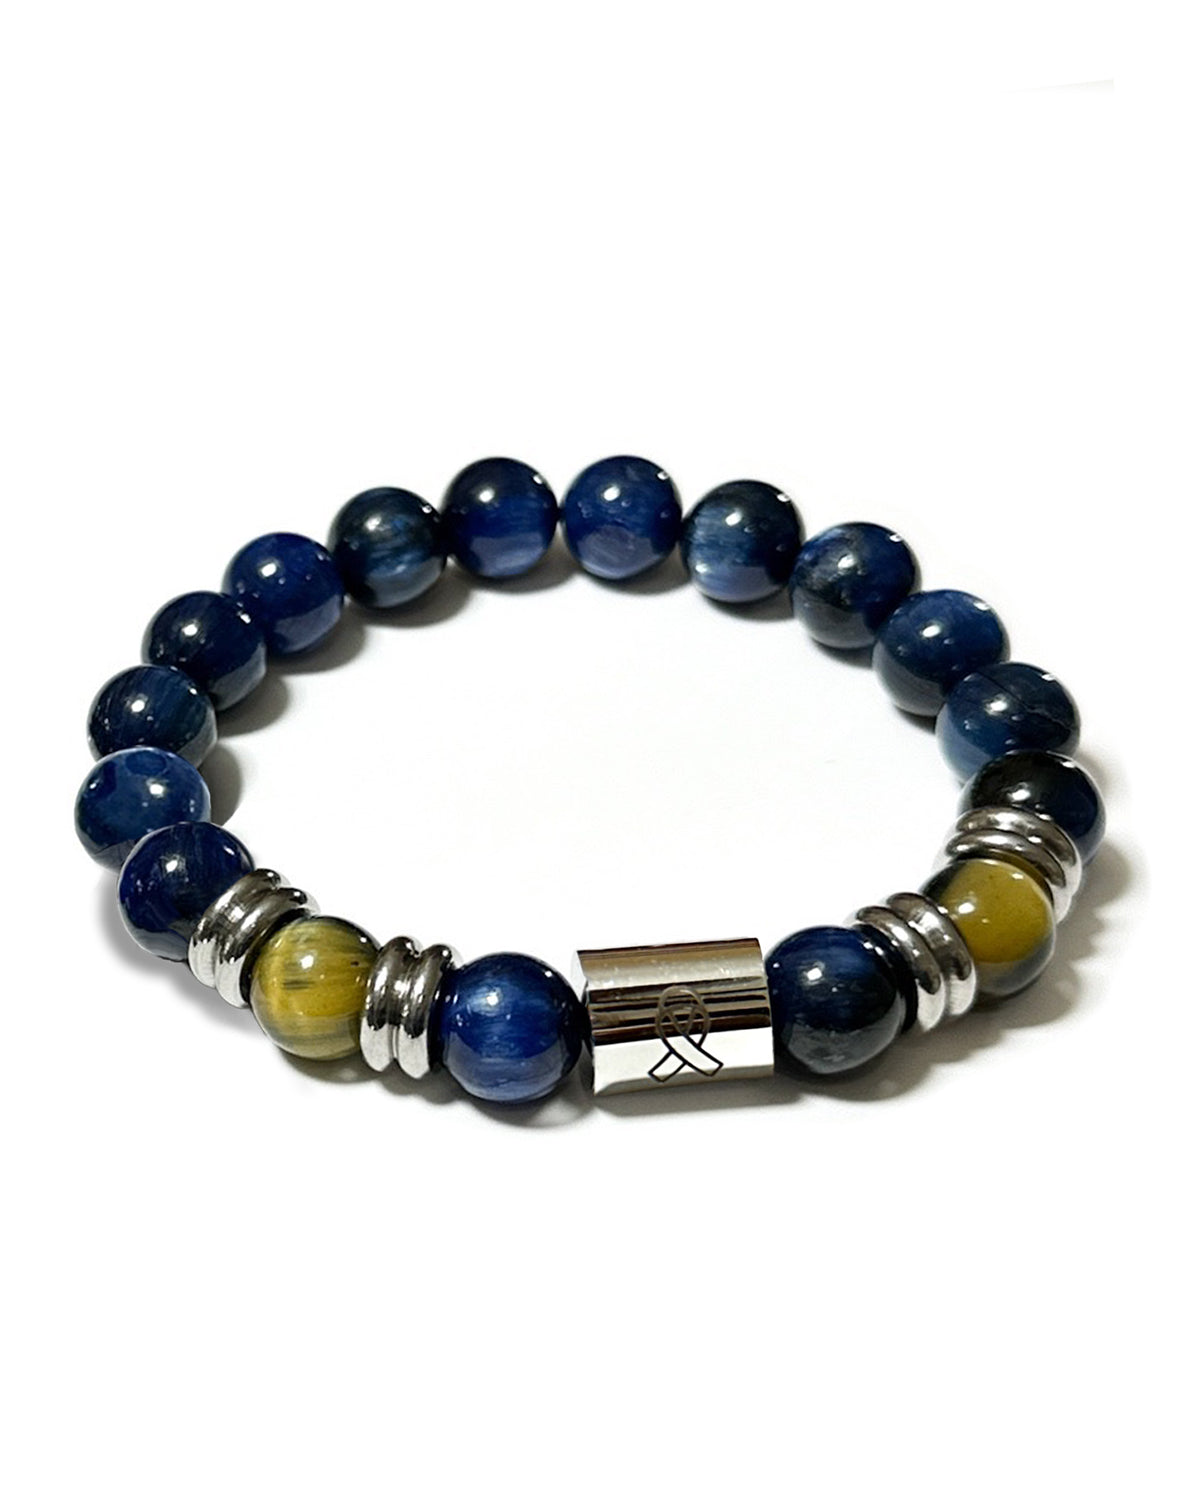 Resilience Cancer Awareness Wellness Healing Intention Unisex Bracelet with Blue Kyanite, Golden Tiger's Eye, Stainless Steel 7.5 inch